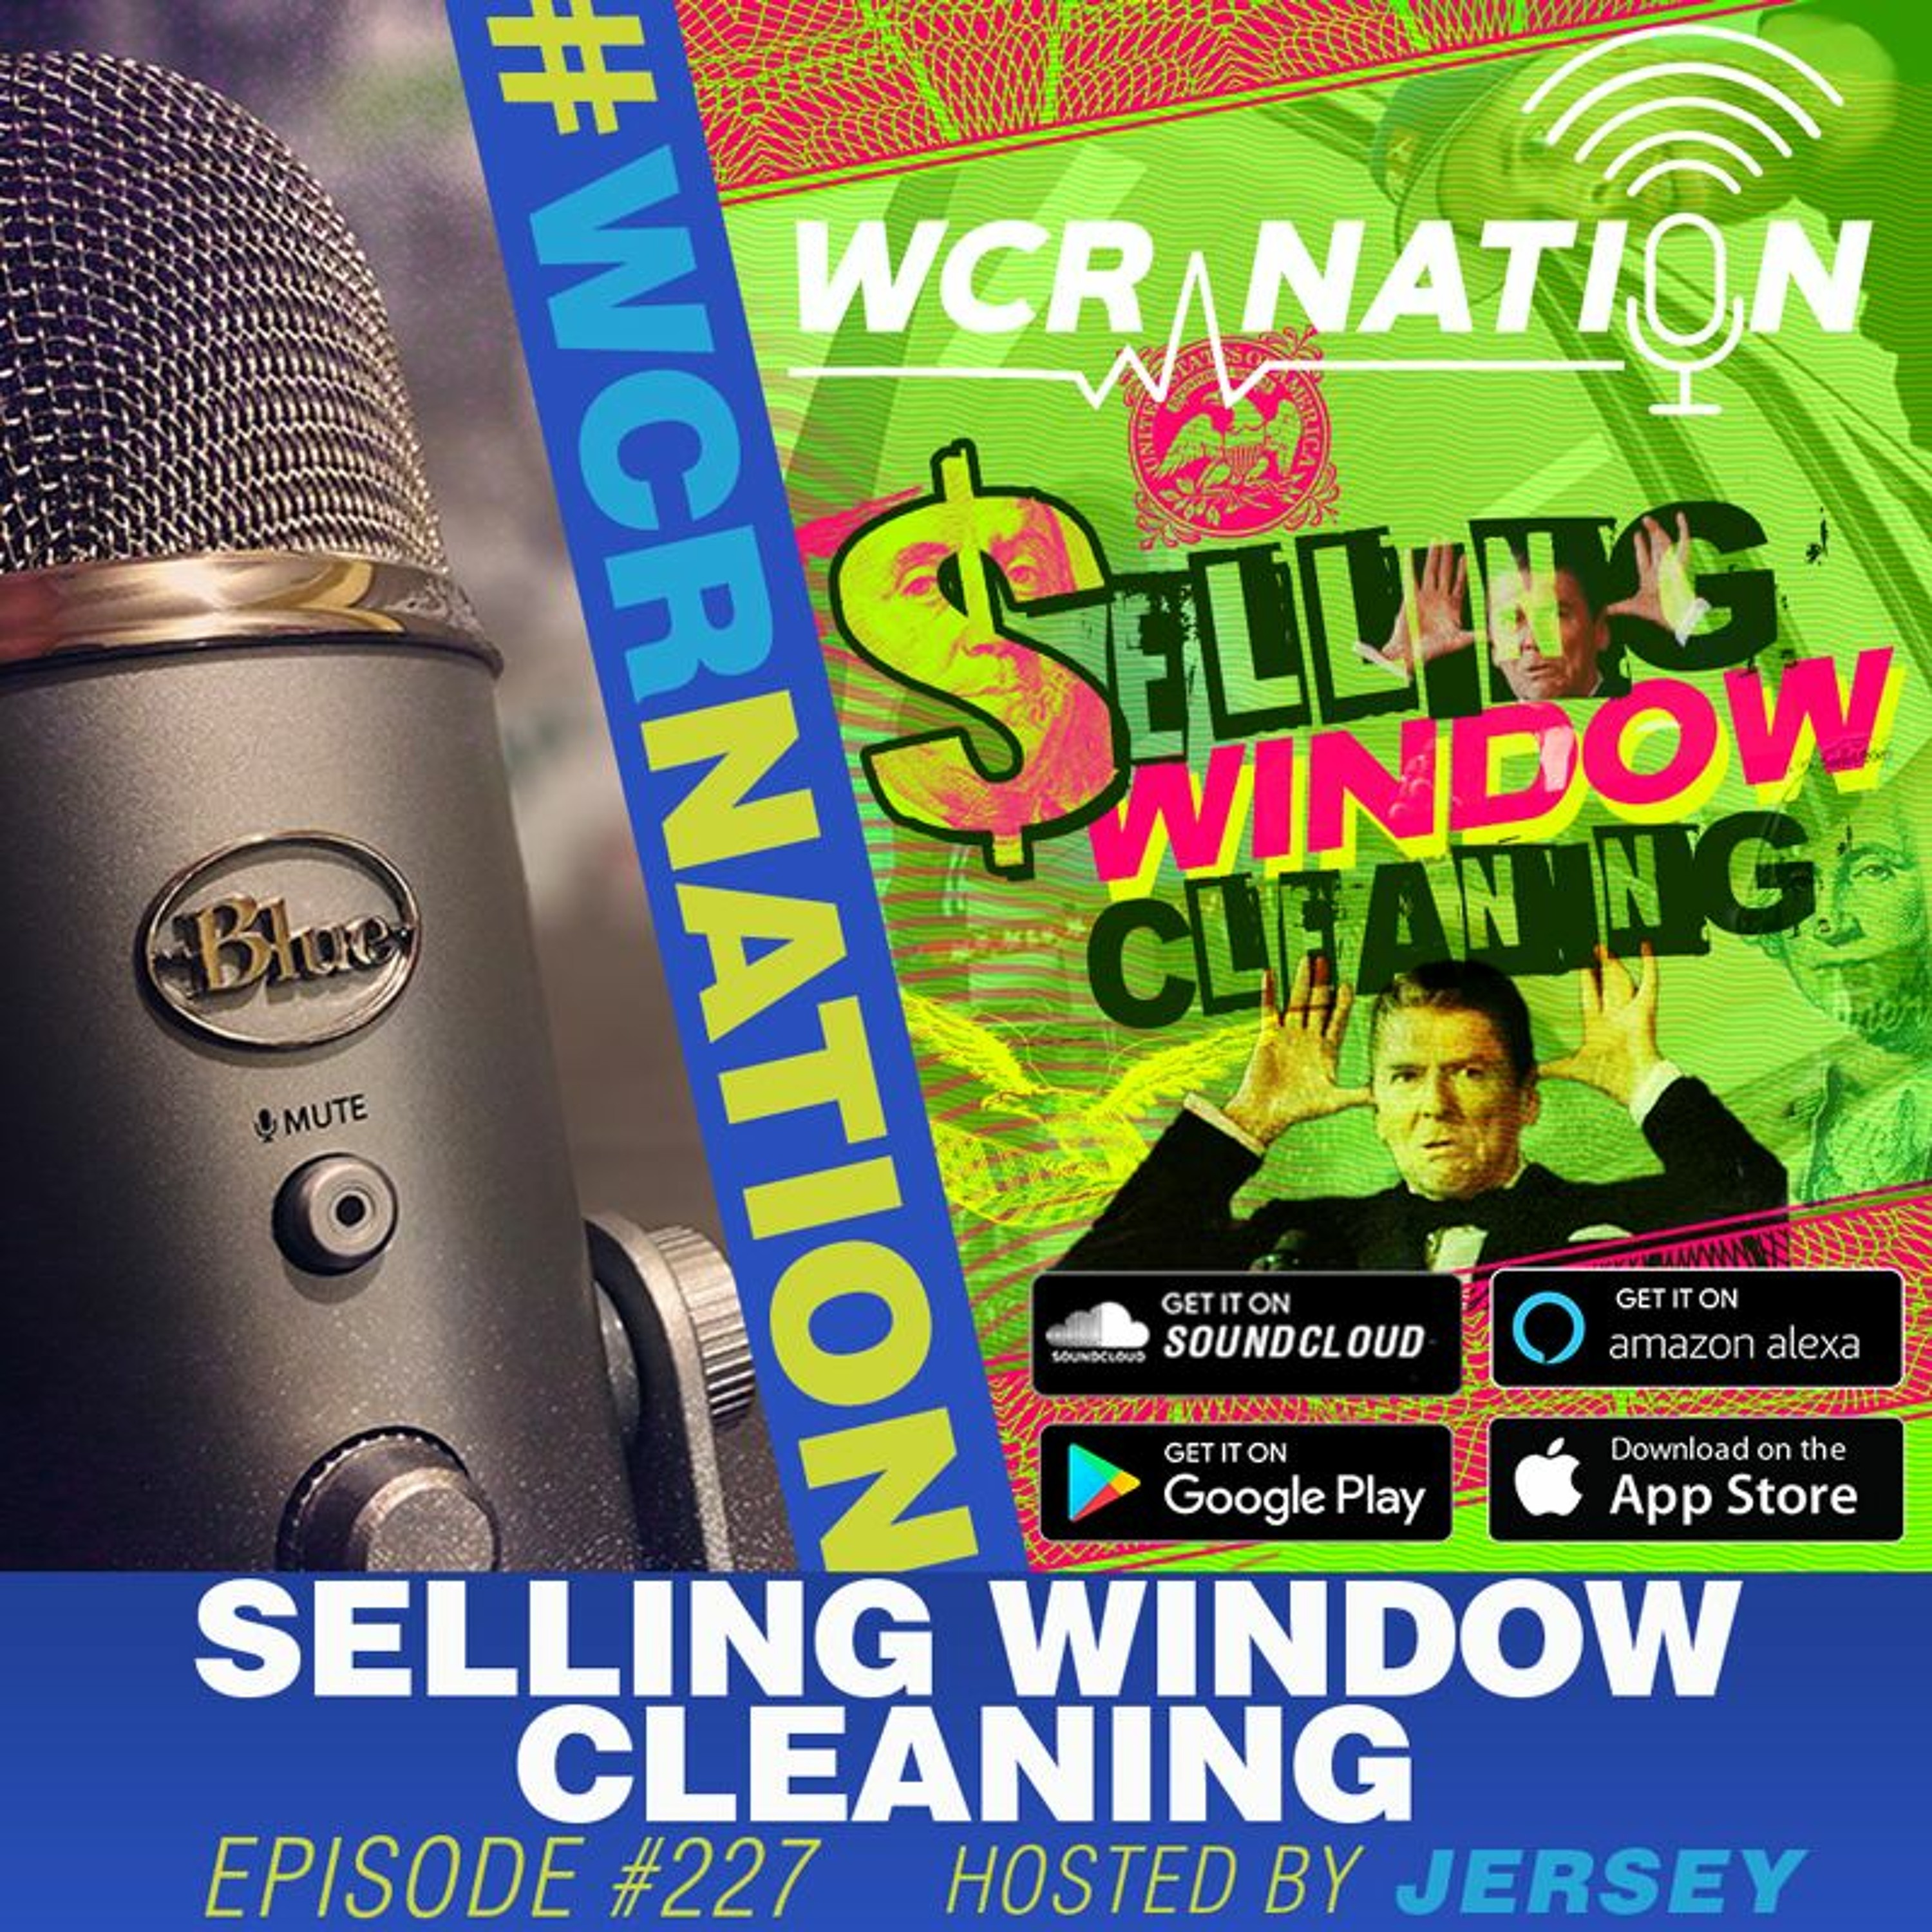 Selling window cleaning | WCR Nation EP 227 | A Window Cleaning Podcast